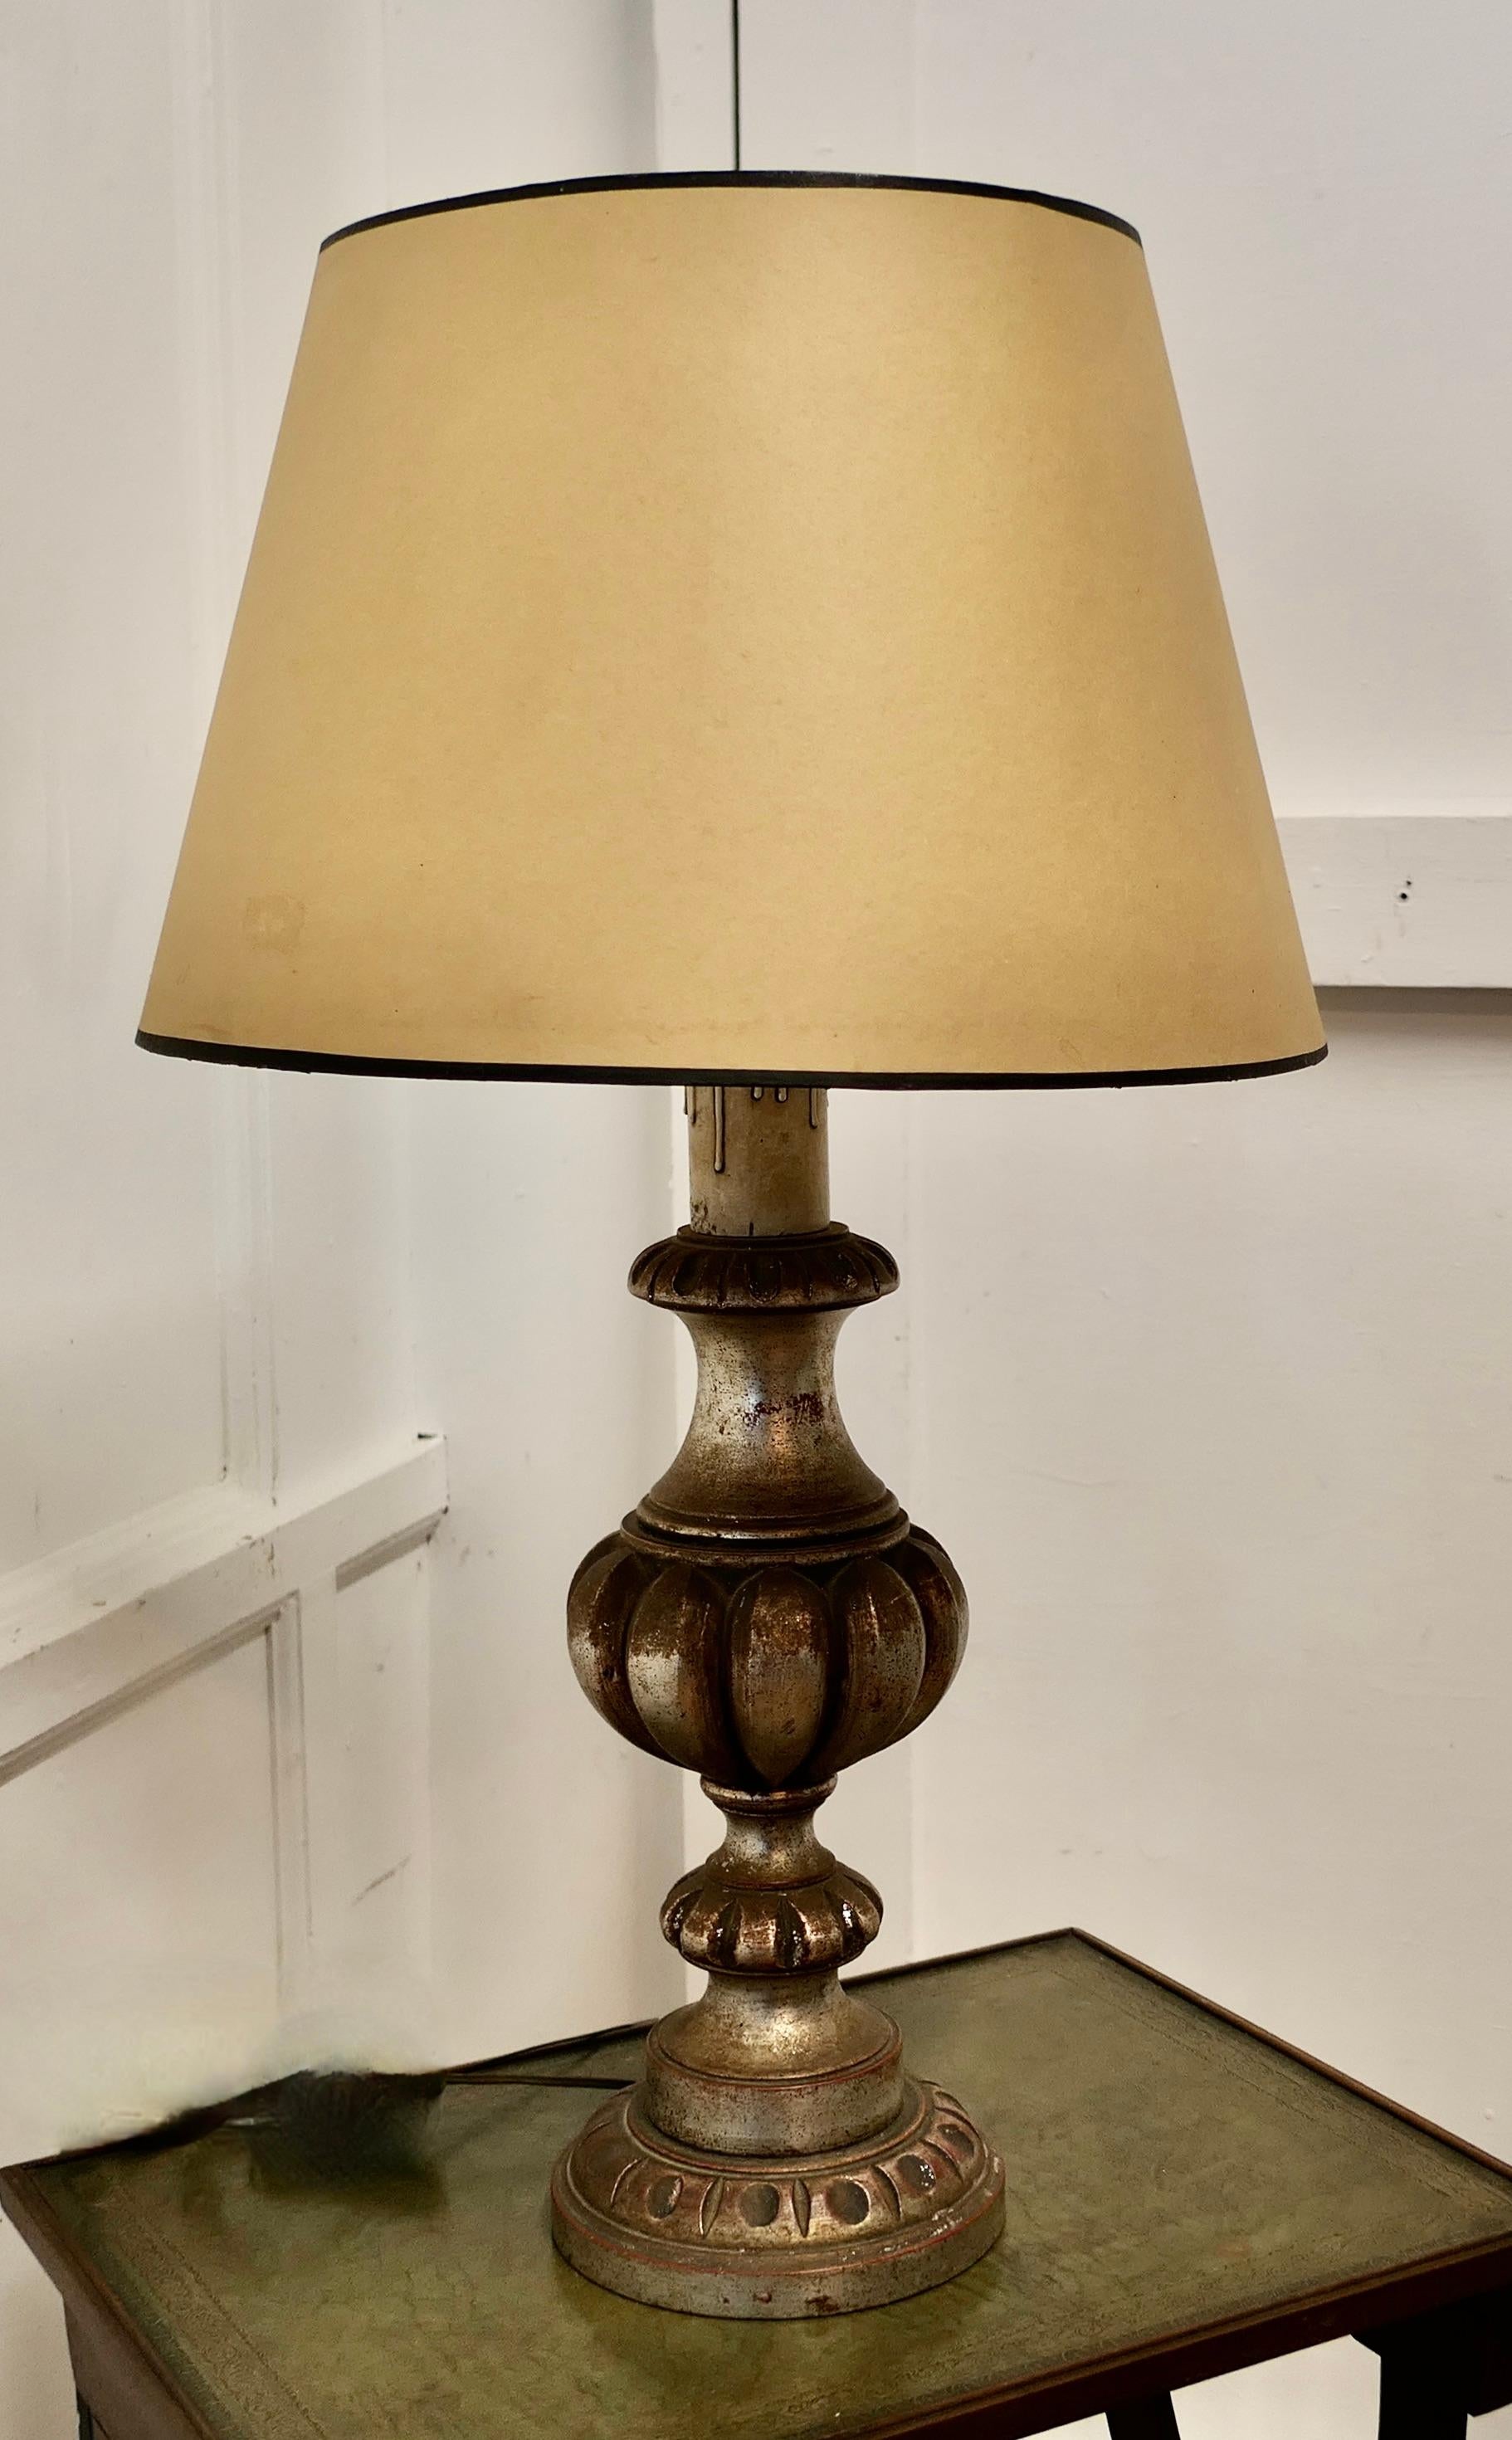 Early 20th Century Large Carved Wooden Table Lamp  This is a great statement piece, it has a large  For Sale